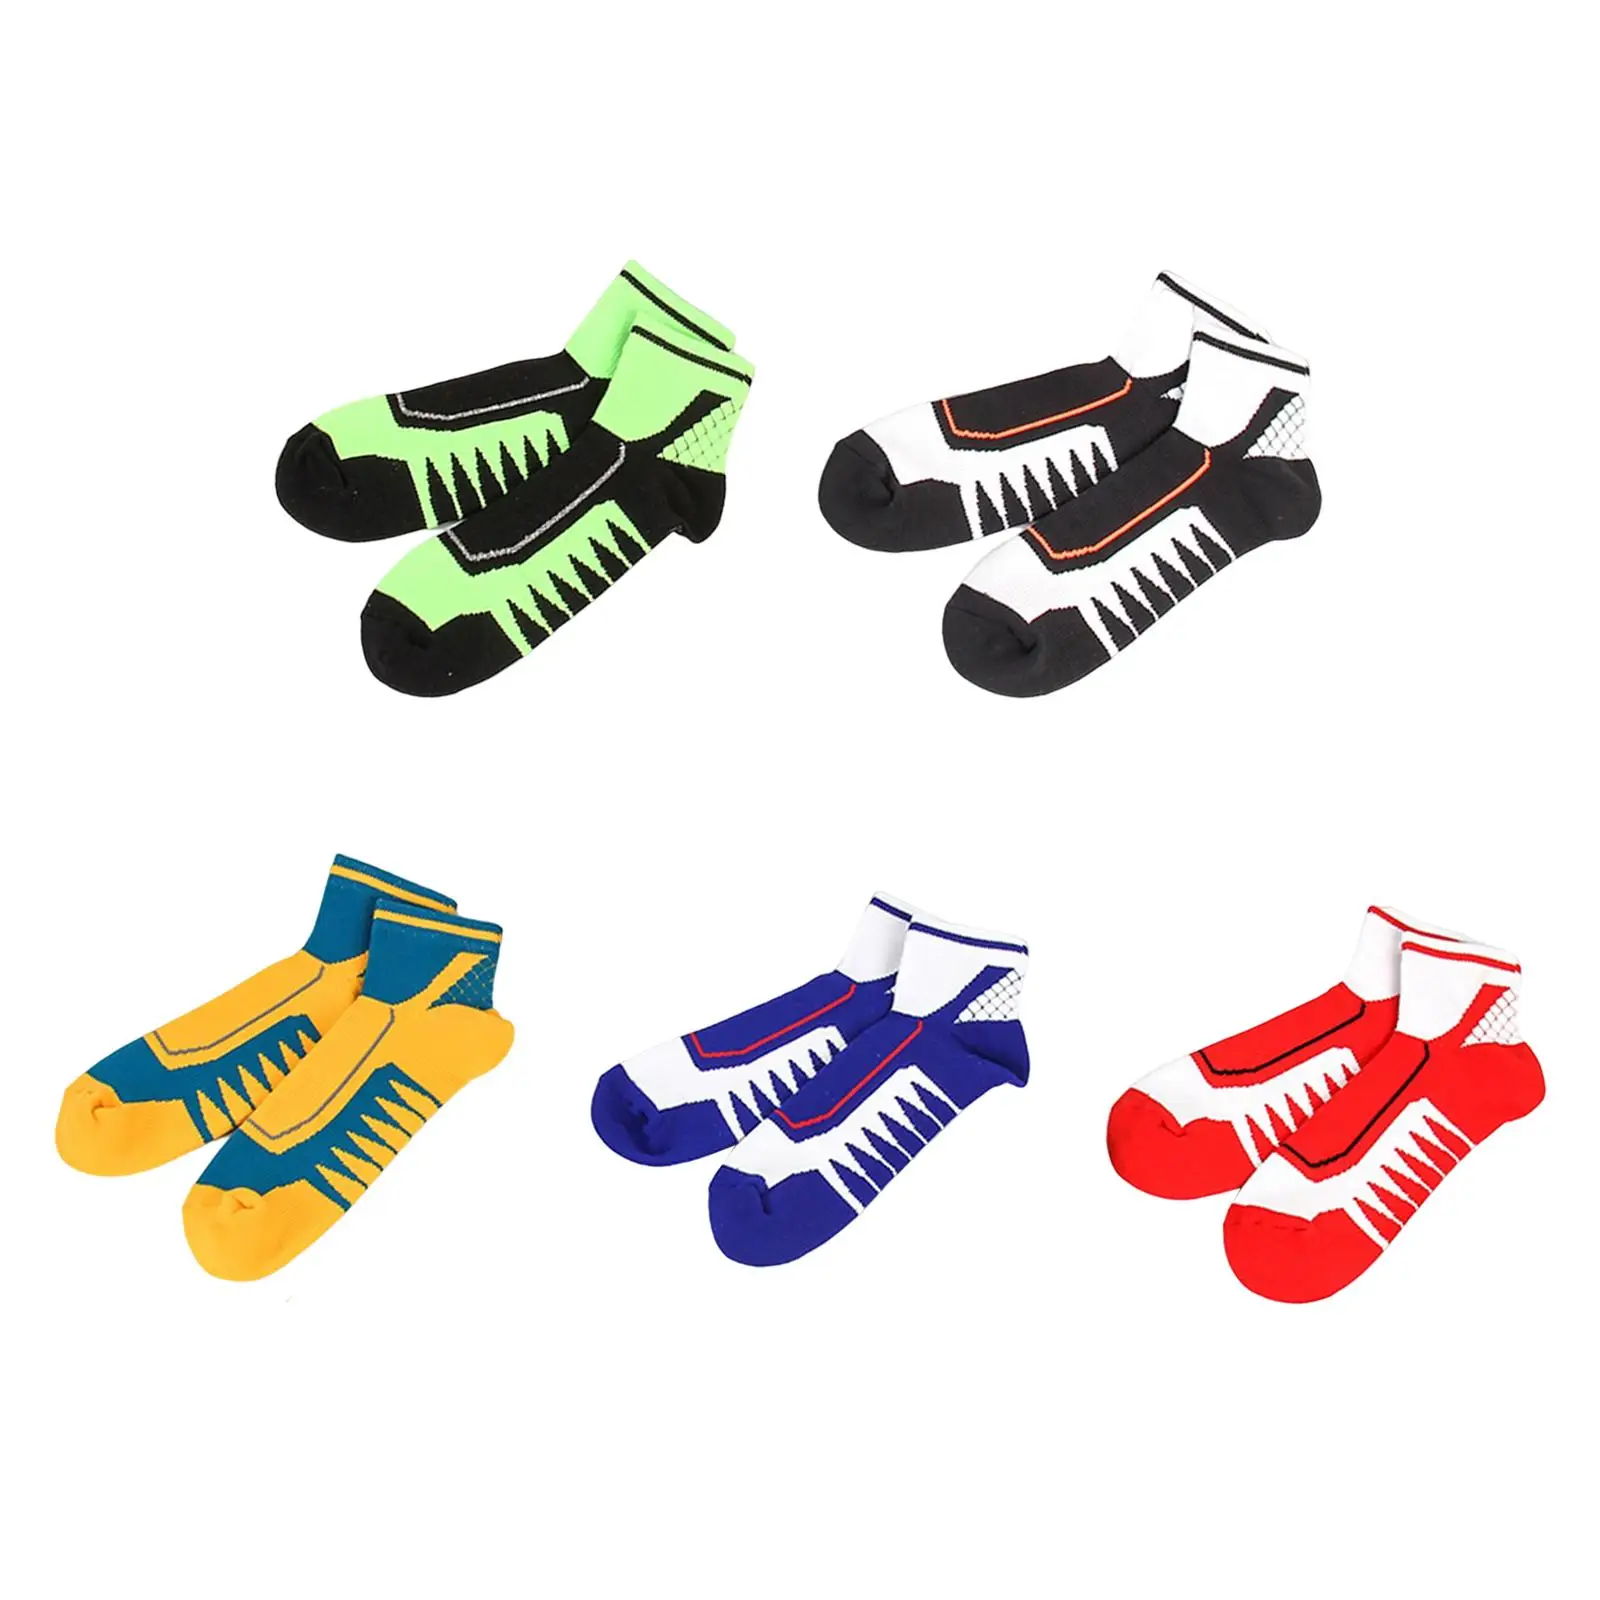 Thicker 5 Pairs Men Crew Socks Winter Fashion Athletic Sports Ankle Socks for New Year Spring Festival Basketball Running Home